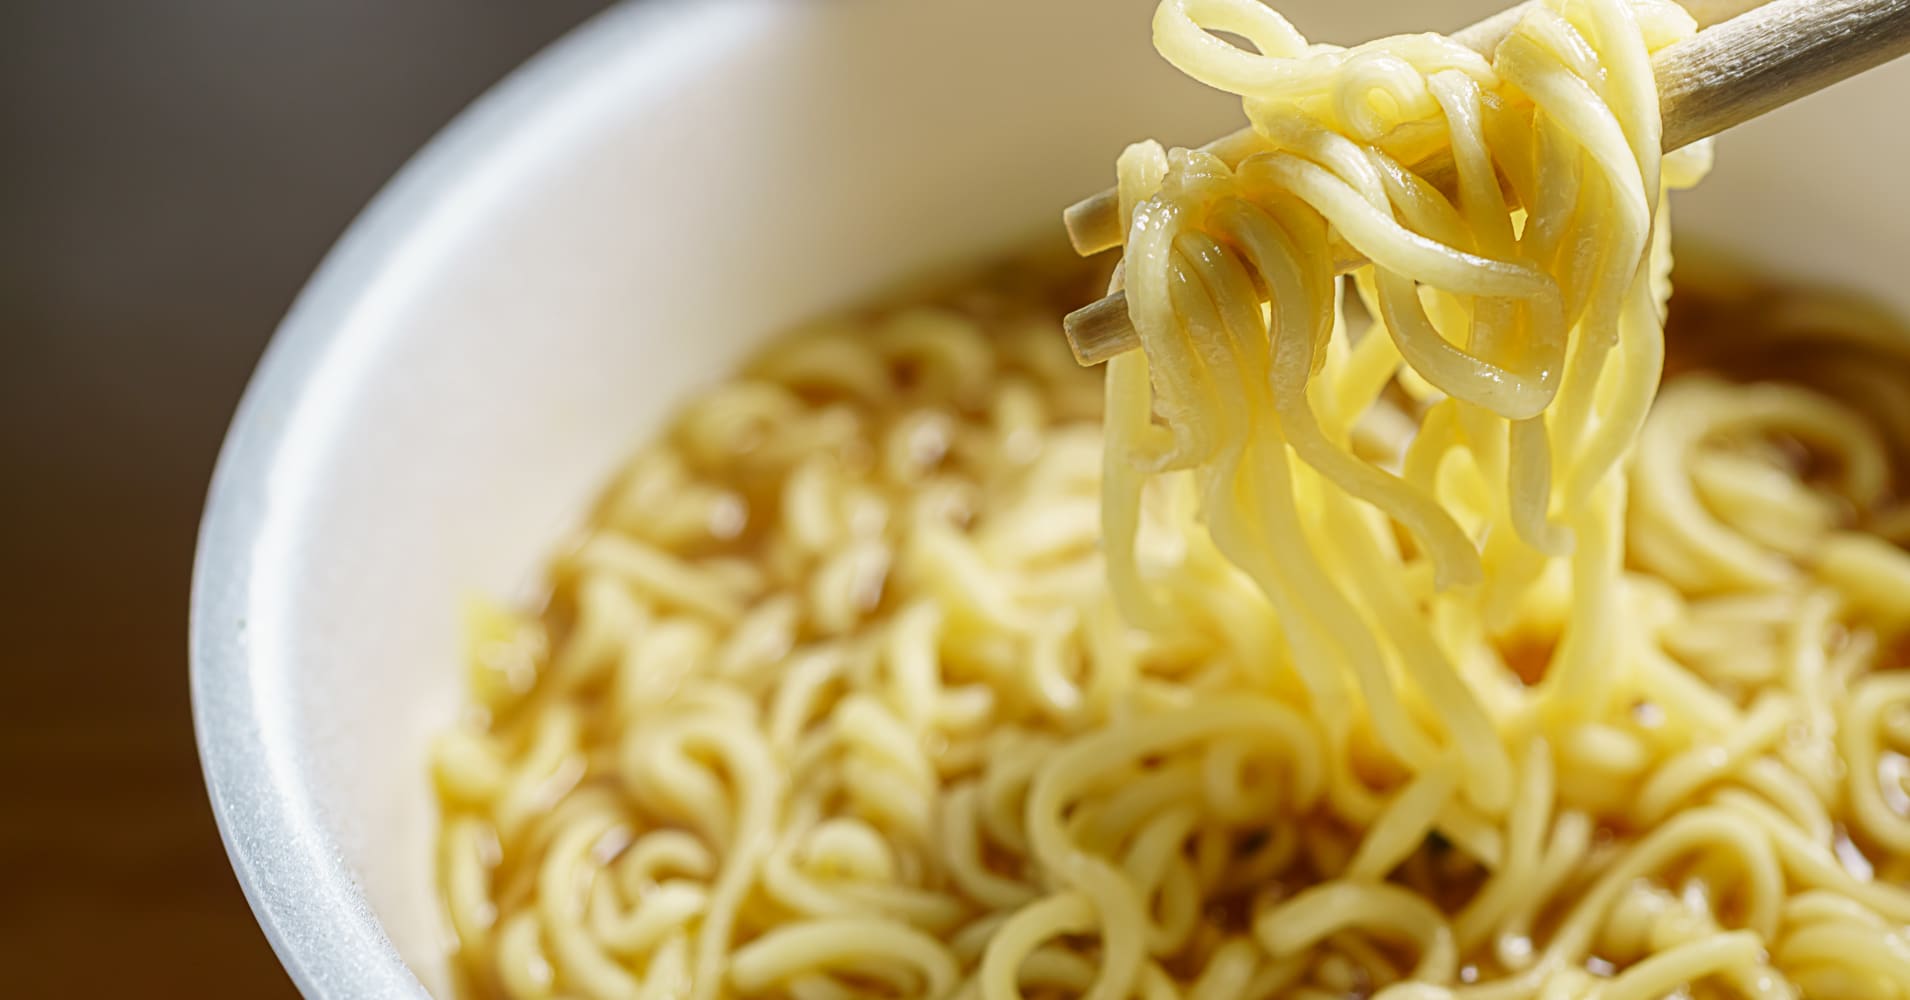 activist nihon global puts forth ideas to build shareholder value at noodle giant toyo suisan